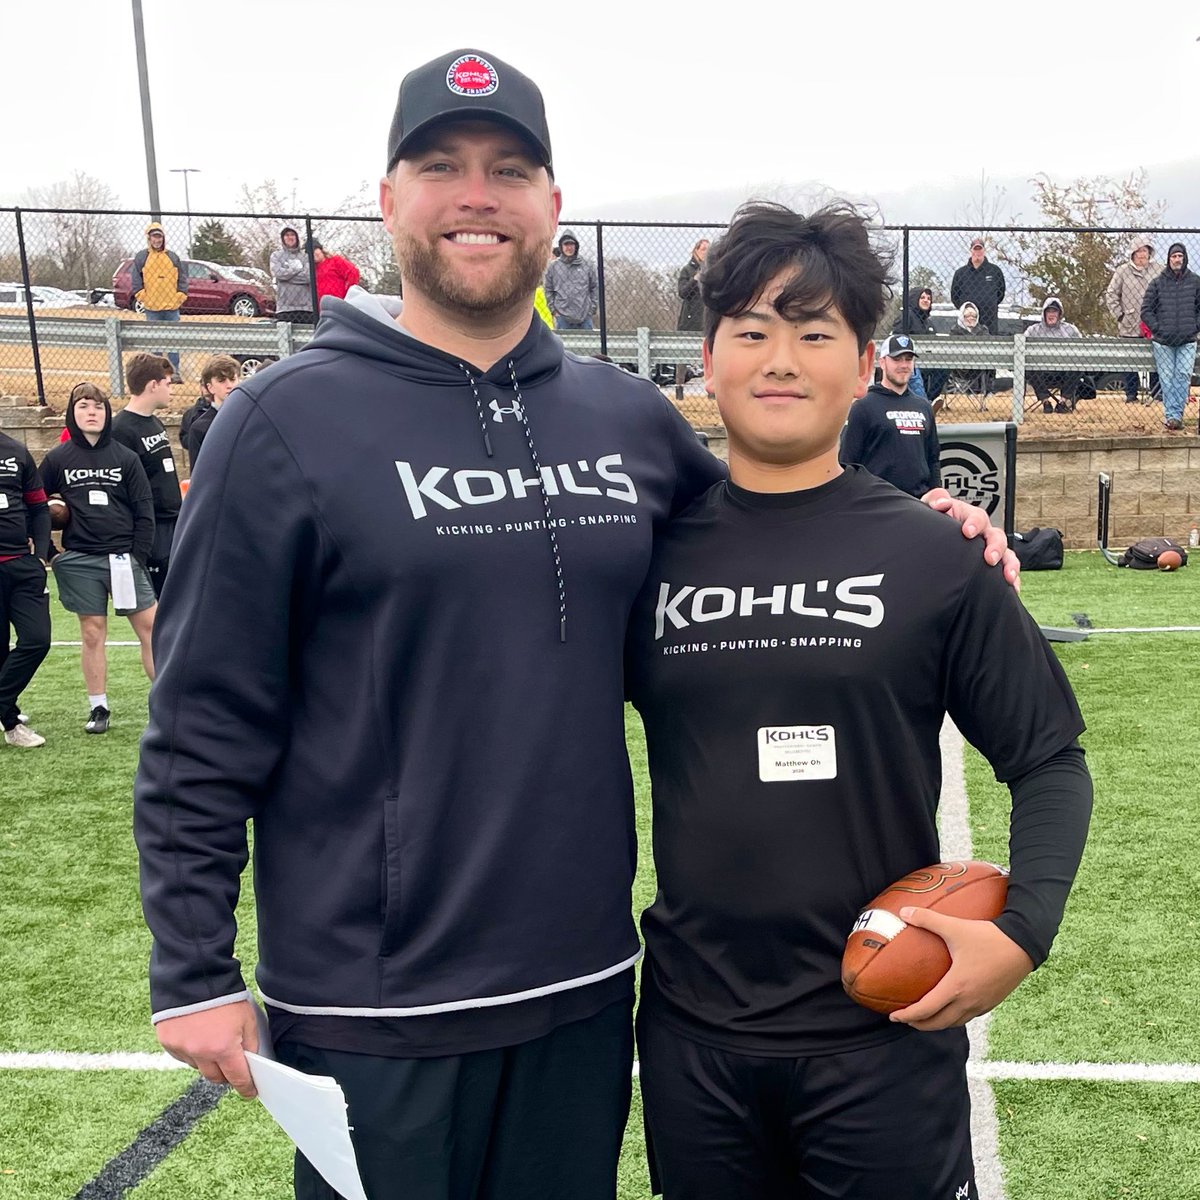 2023 Southern #KohlsShowcase Competition Winners: 🏆 LS: Coplelin 🏆 LS: M. Oh